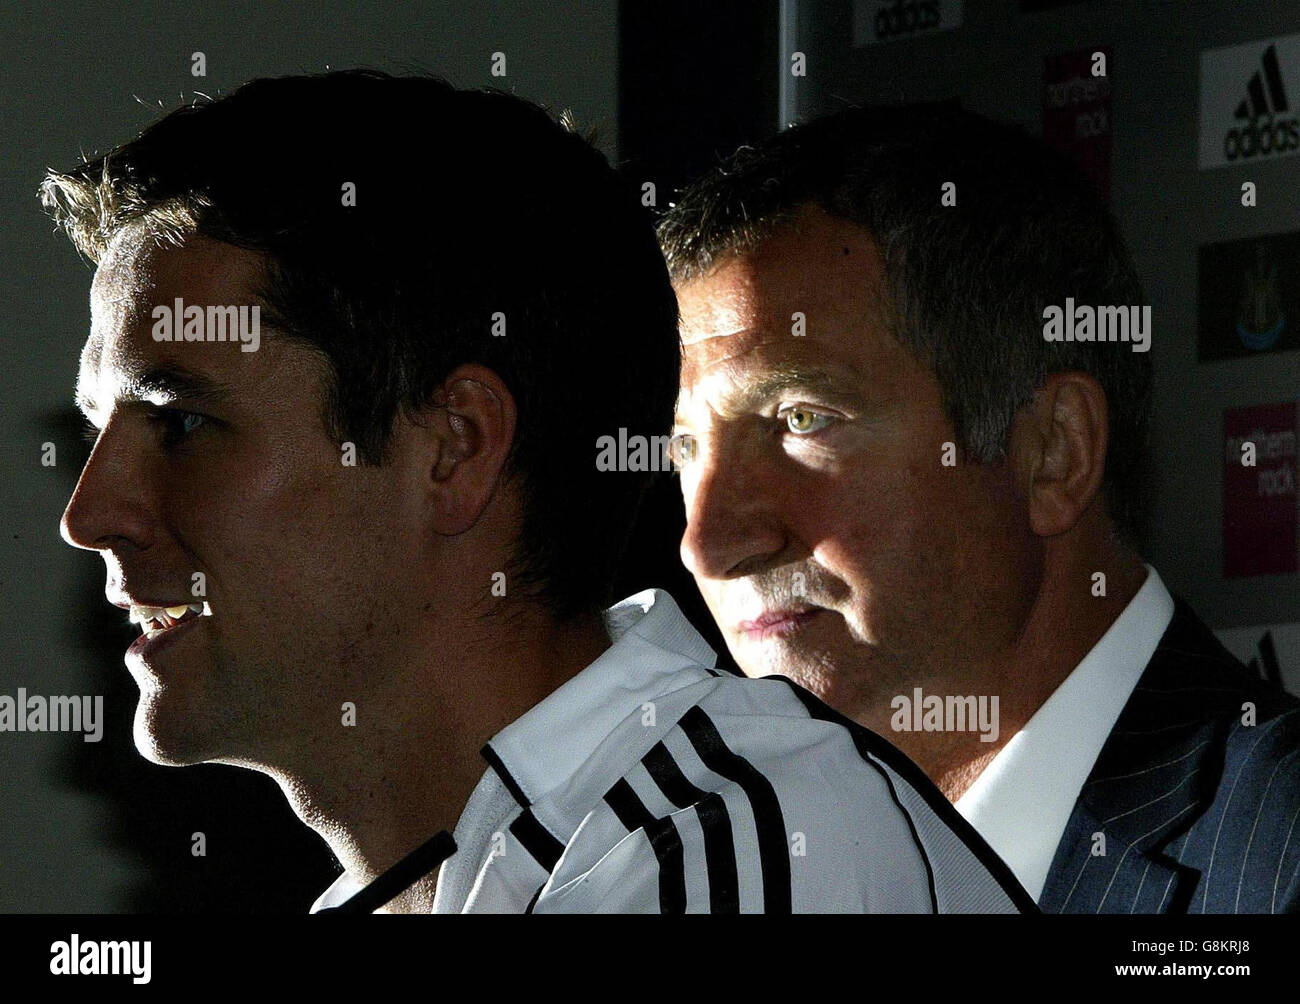 Newcastle United's new signing Michael Owen (L) and manager Graham Souness talk to the media during a press conference at St James Park, Newcastle, Wednesday August 31, 2005. See PA story SOCCER Newcastle. PRESS ASSOCIATION Photo. Photo credit should read: Owen Humphreys/PA Stock Photo